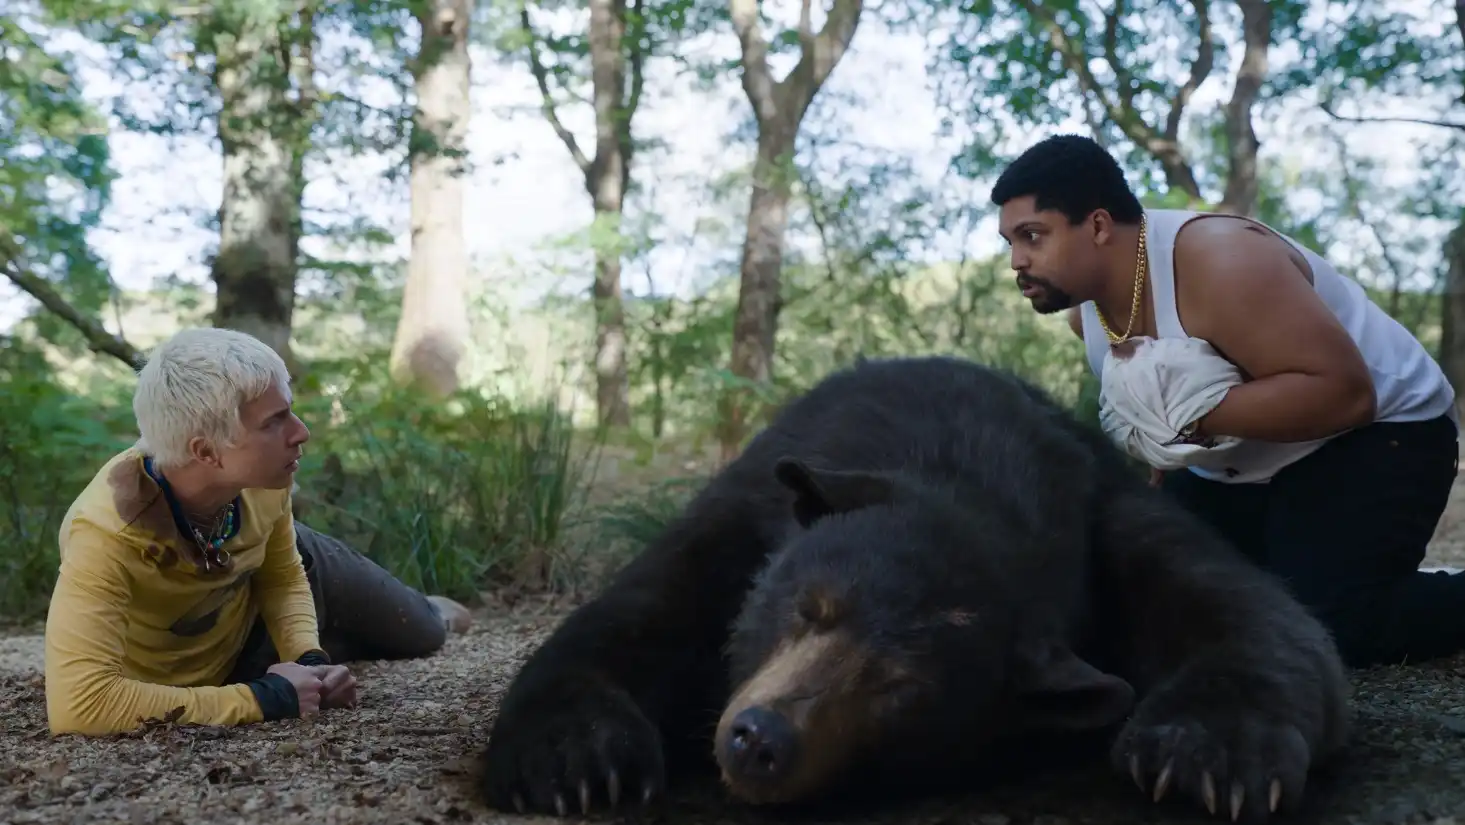 Cocaine Bear is one of the most entertaining movies of the year so far and without question the stupidest film destined to be a cult classic.